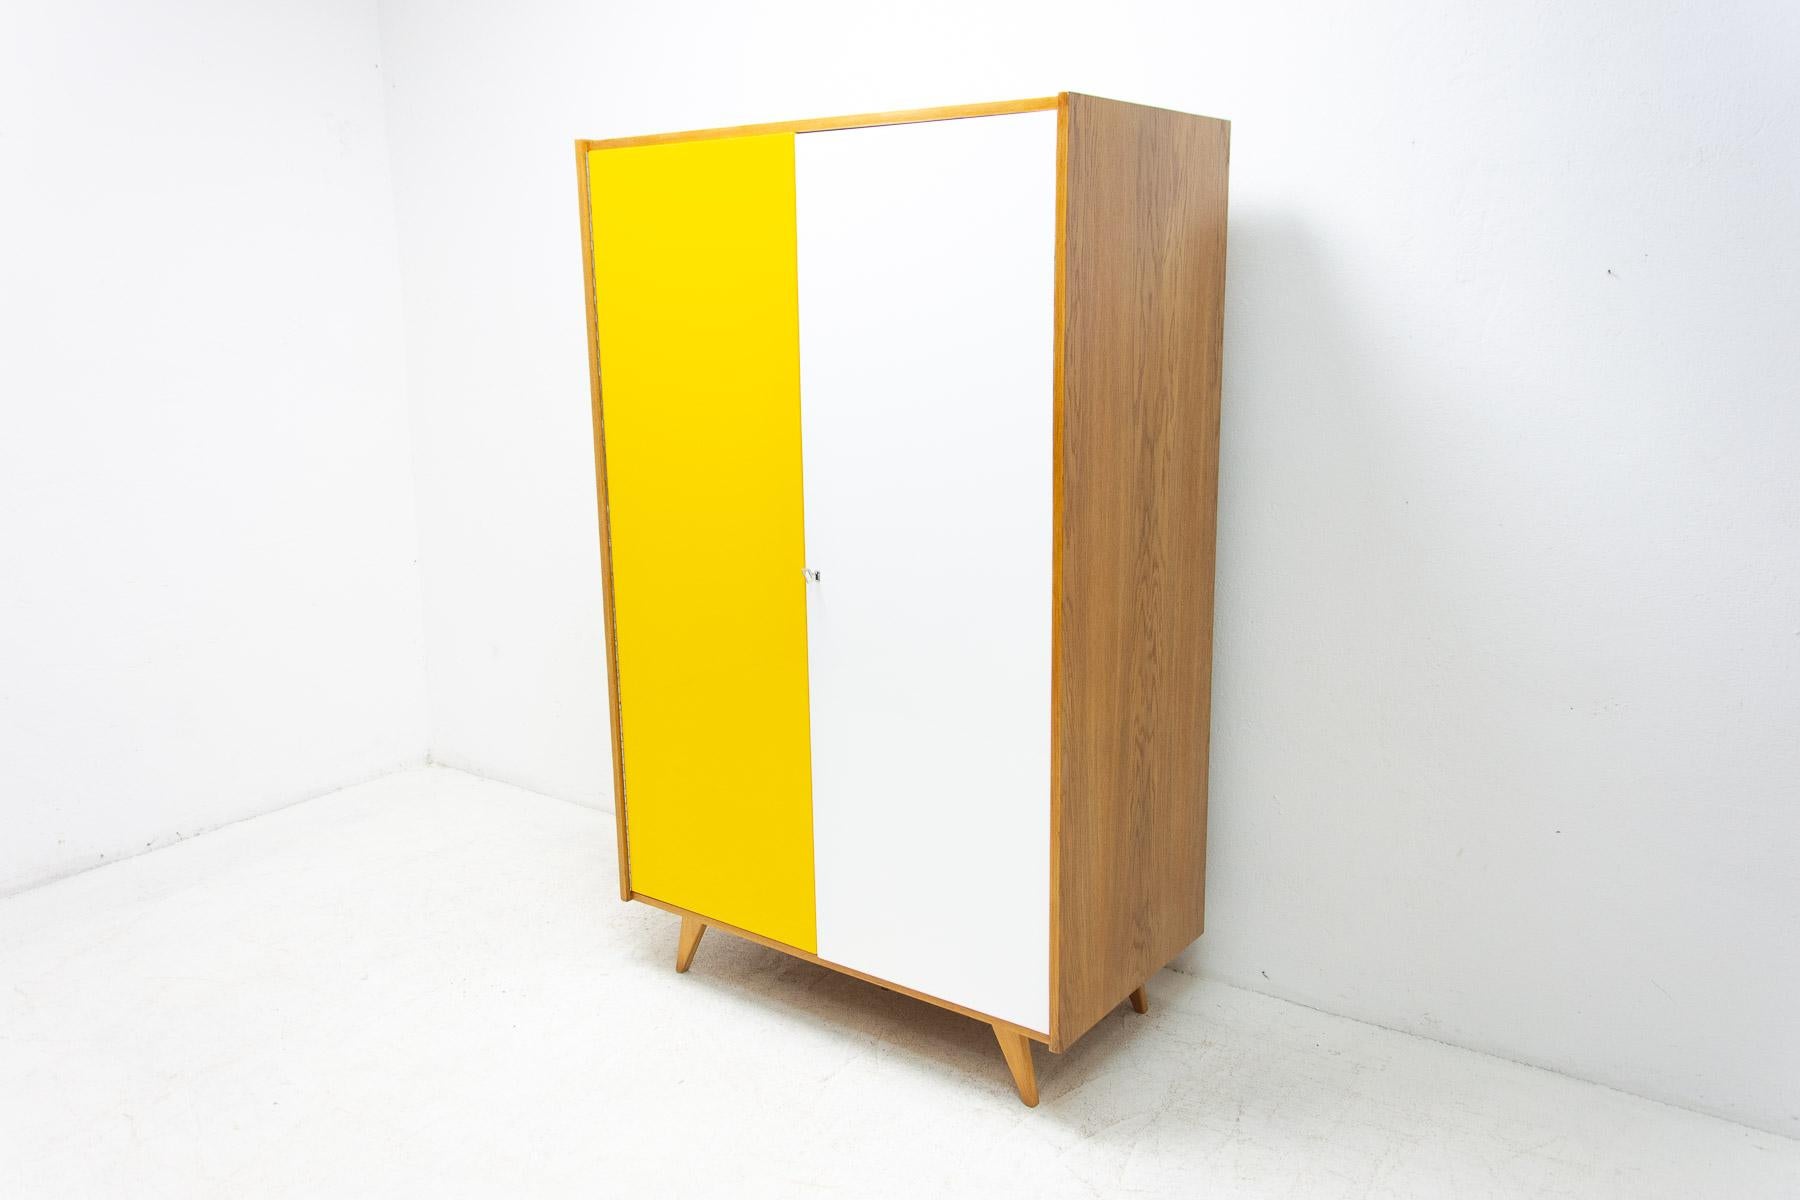 Mid-century wardrobe, catalogue No. U-450, designed by Jiri Jiroutek. It´s made of beechwood, veneer, plywood and laminate. In excellent condition, fully refurbished.

The cabinet comes from the famous Universal series (U-450), which was designed